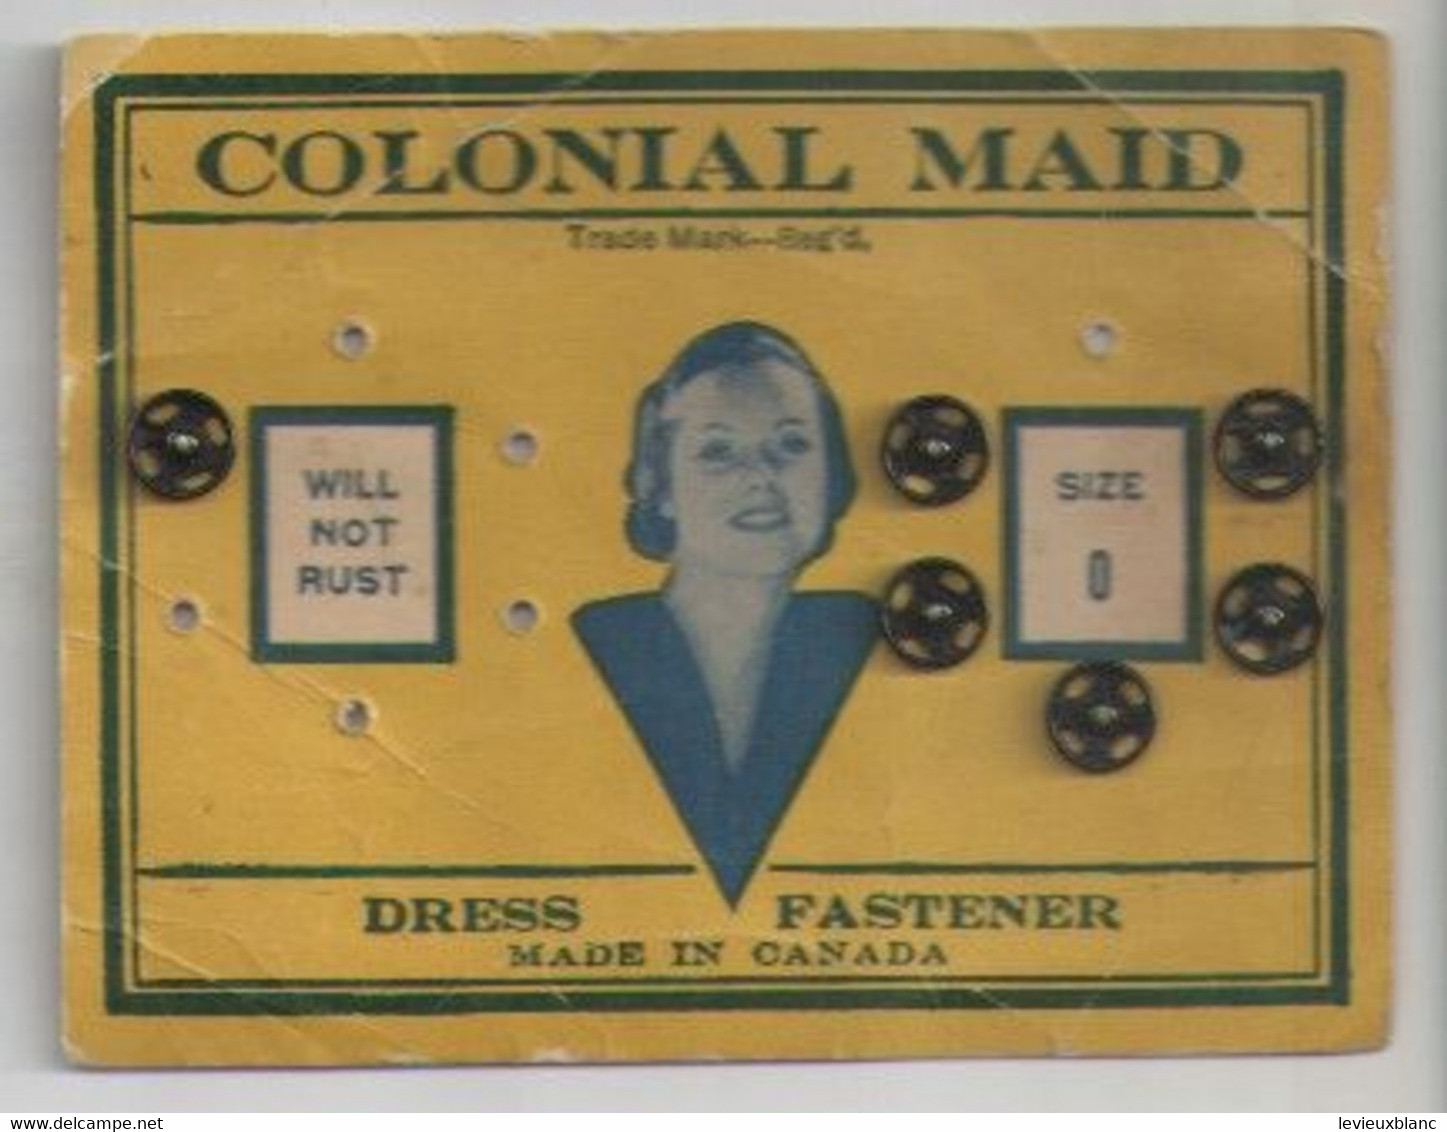 Mercerie / Boutons Pressions/Colonial Maid /Dress Fastener/Made In Canada /Carton De Présentation/Vers 1950-60     MER87 - Boutons